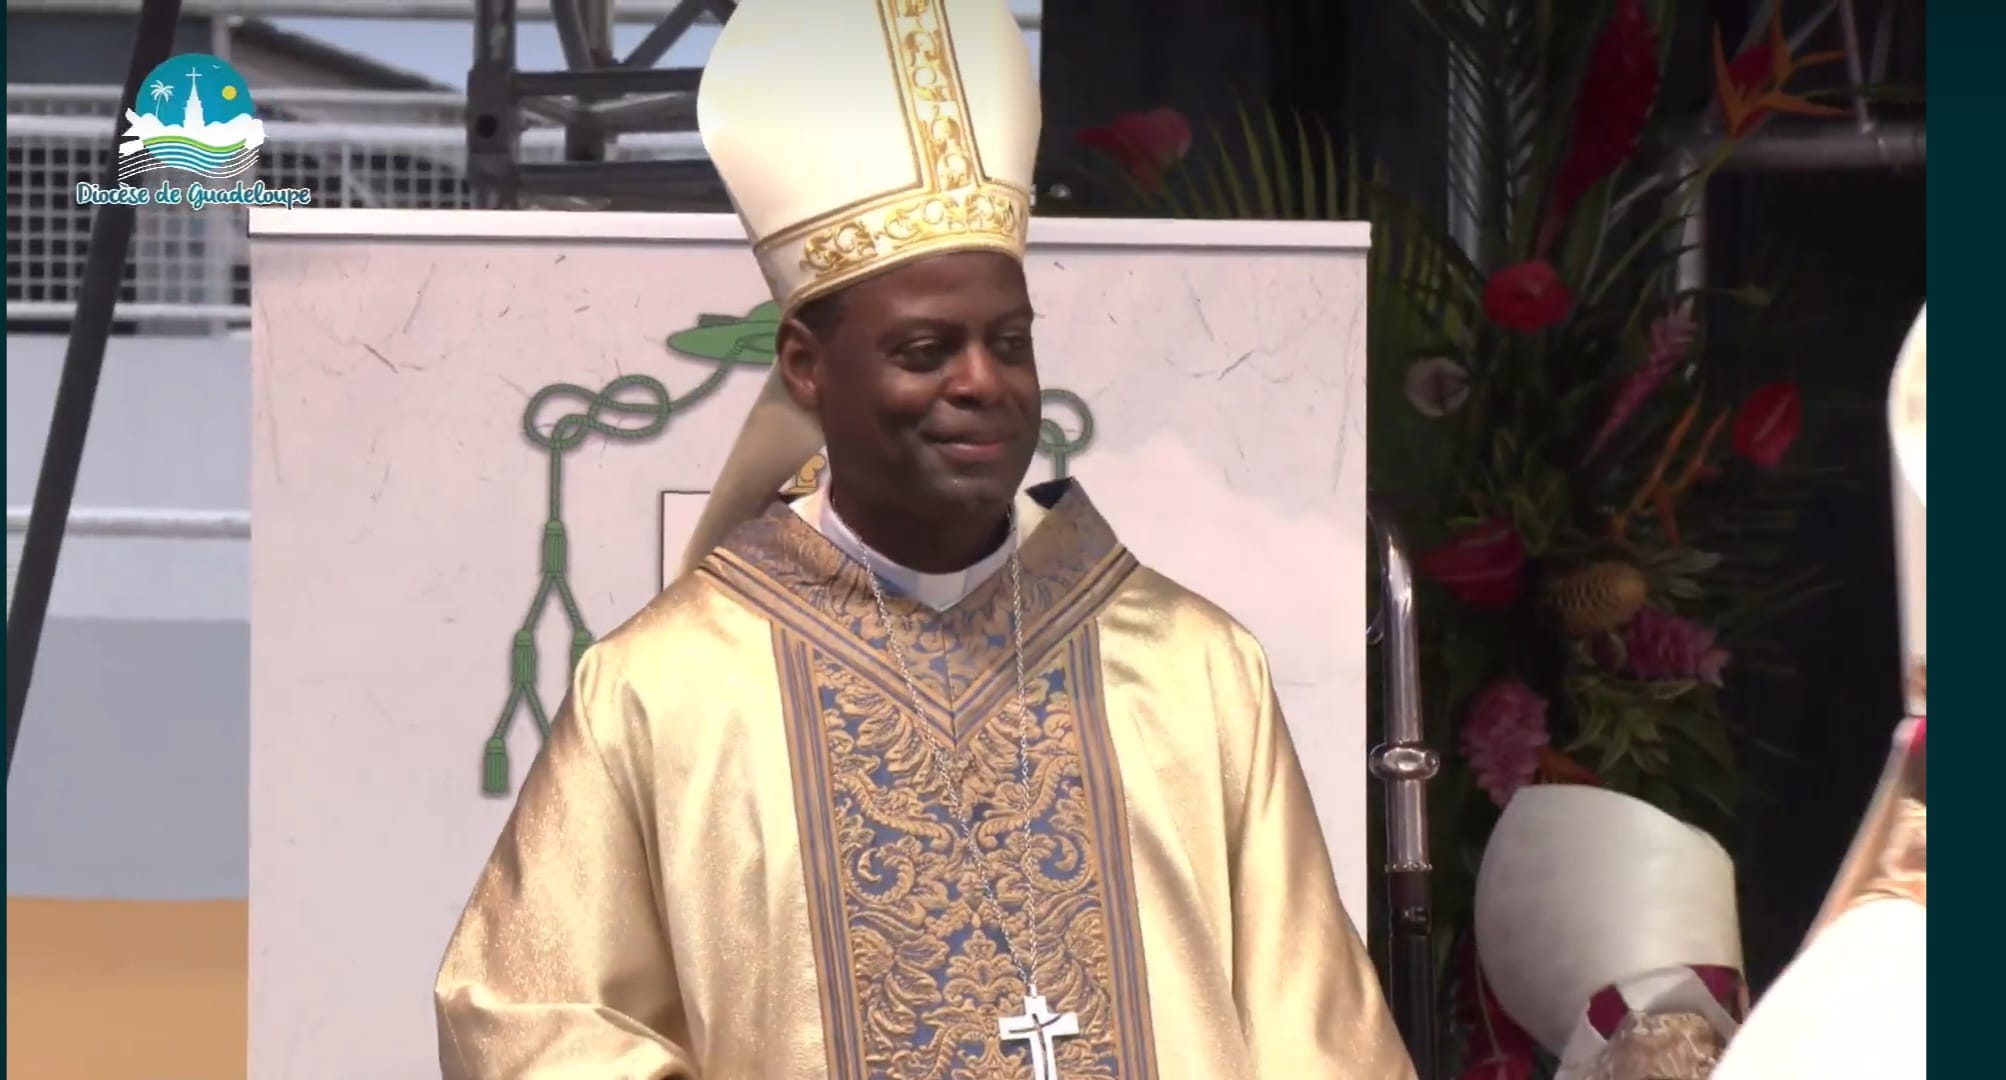 Episcopal Ordination of Mgr Philippe Guiougou – Bishop of the Diocese of Pointe-a-Pitre